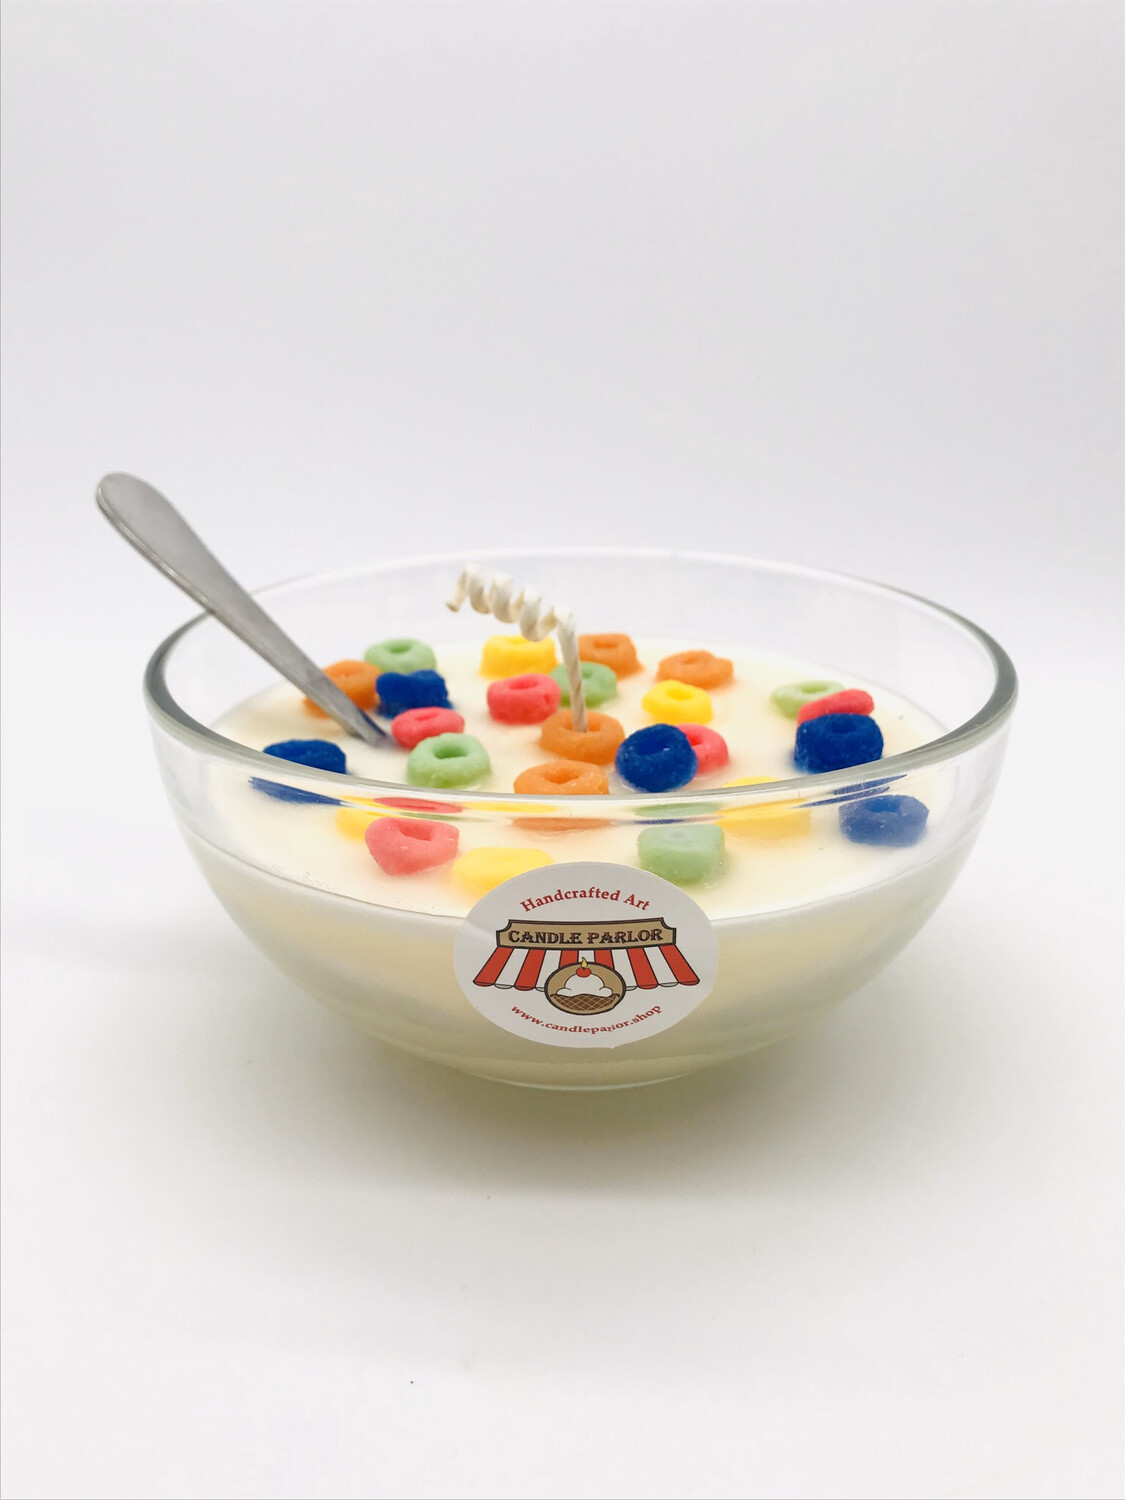 Vanilla Scented Cereal Candle, LG Bowl